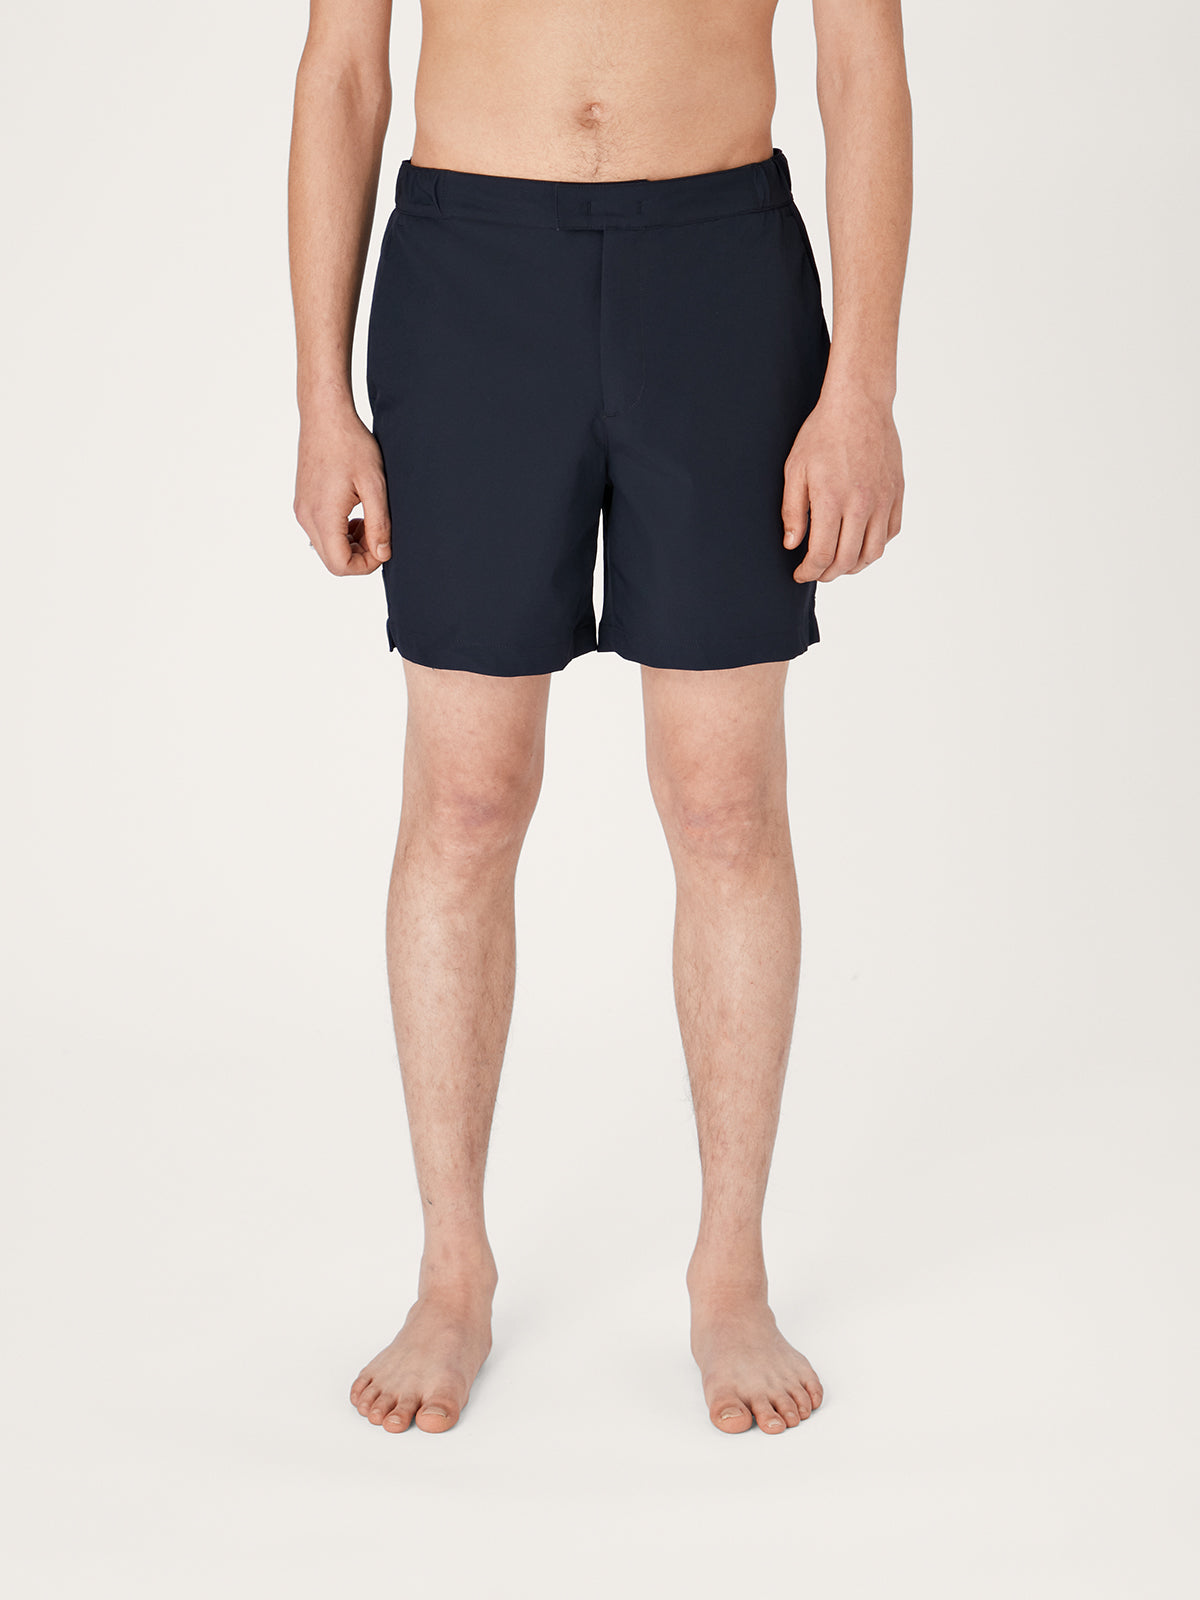 The Anywear Short 2.0 || Navy | Recycled nylon without netting